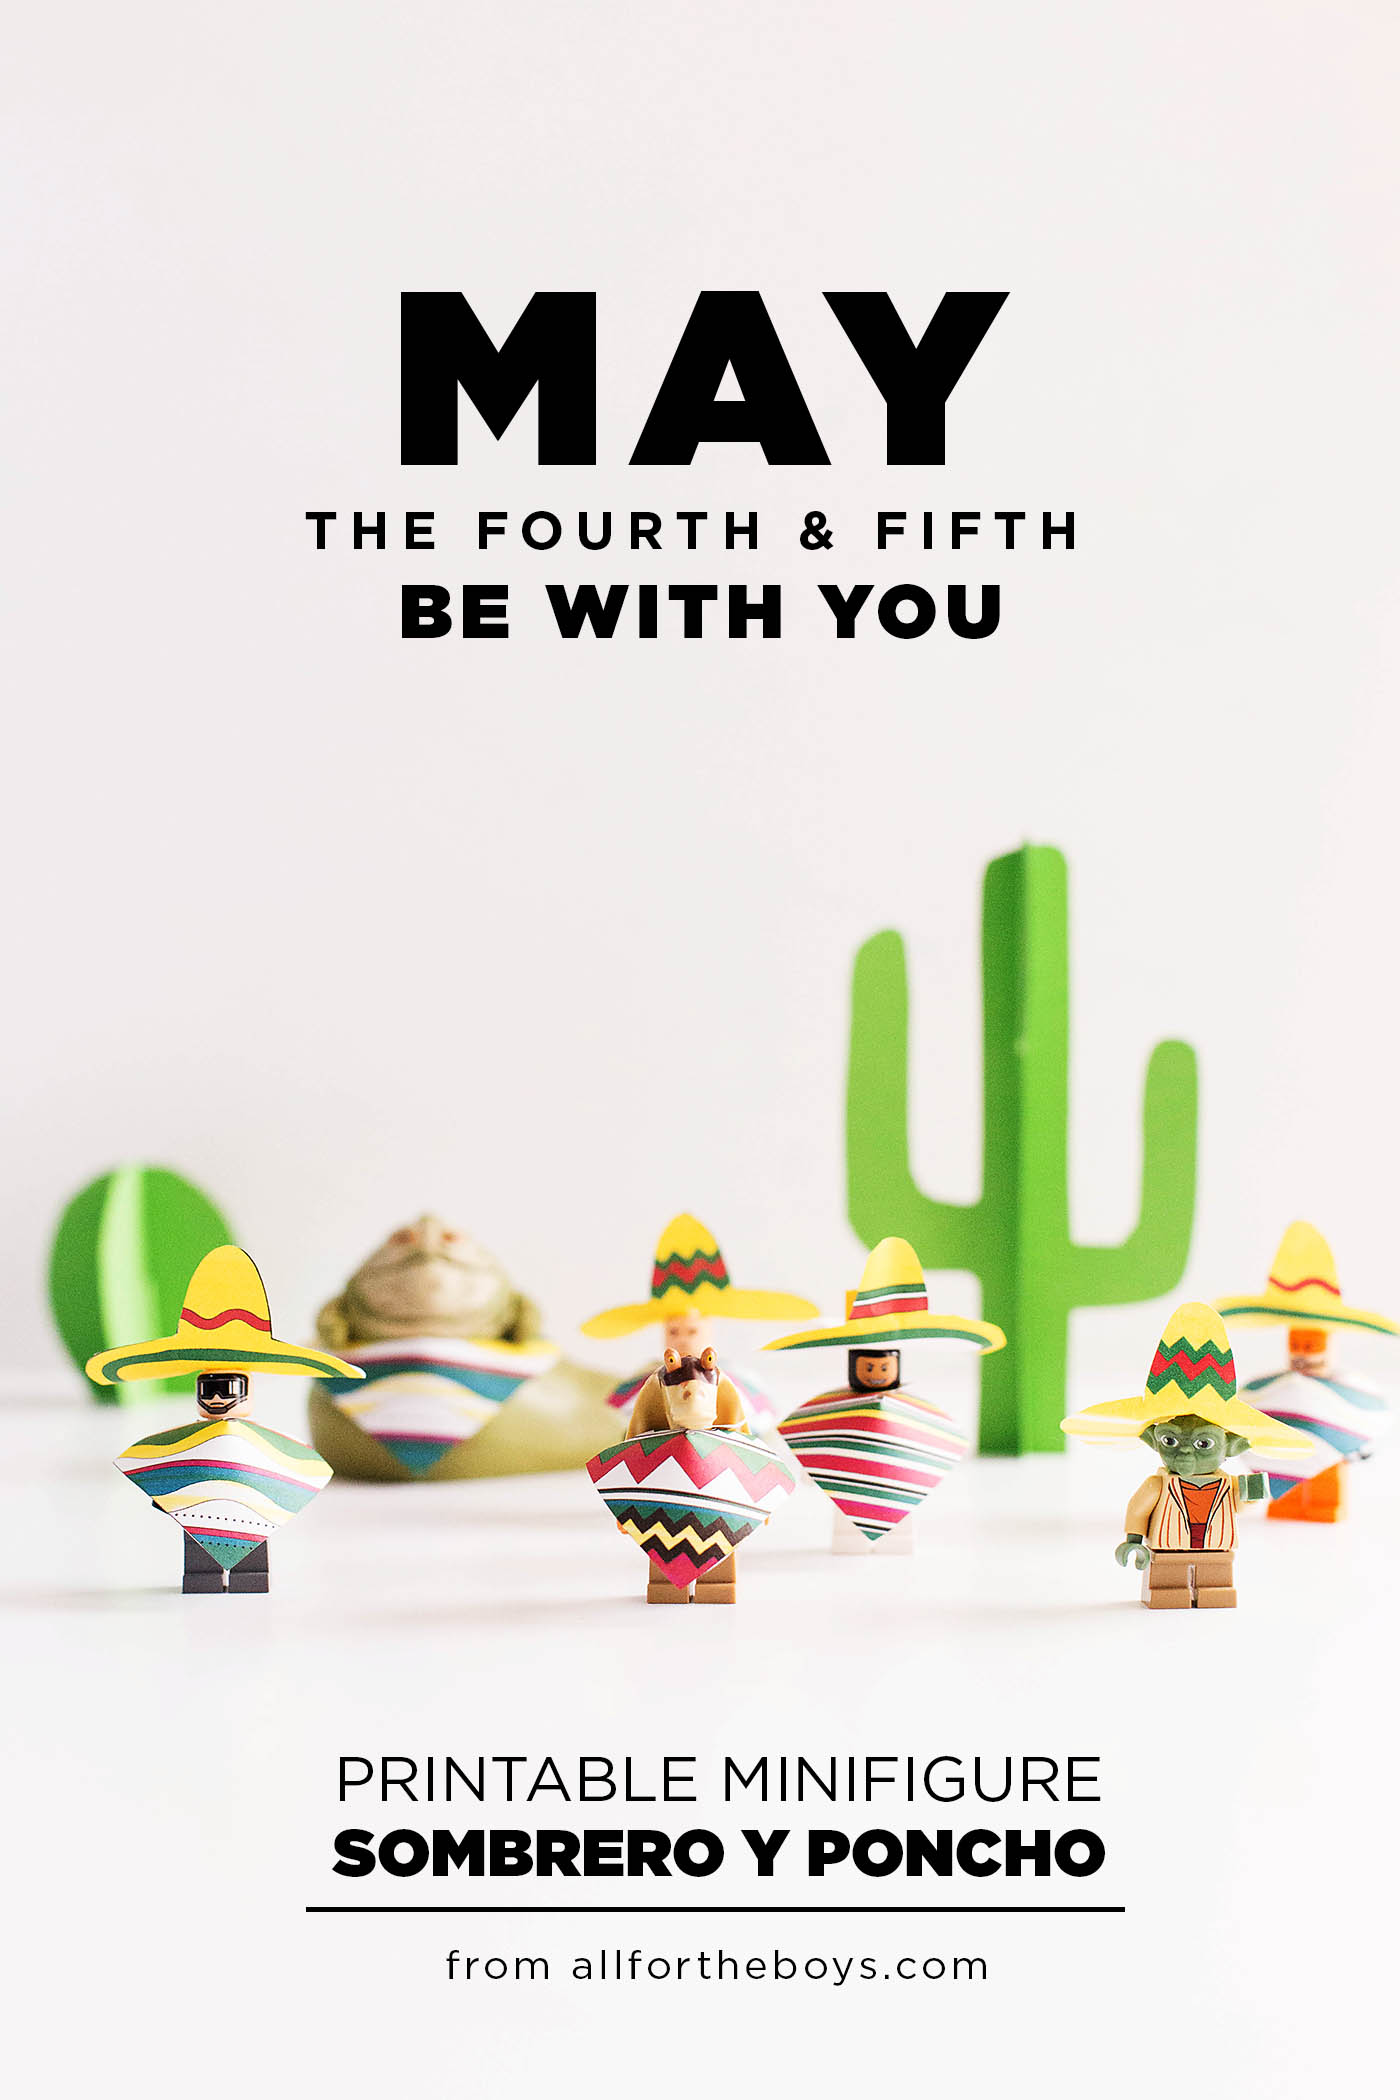 Printable sombreros and ponchos for LEGO minifigures - May the fourth AND fifth be with you!